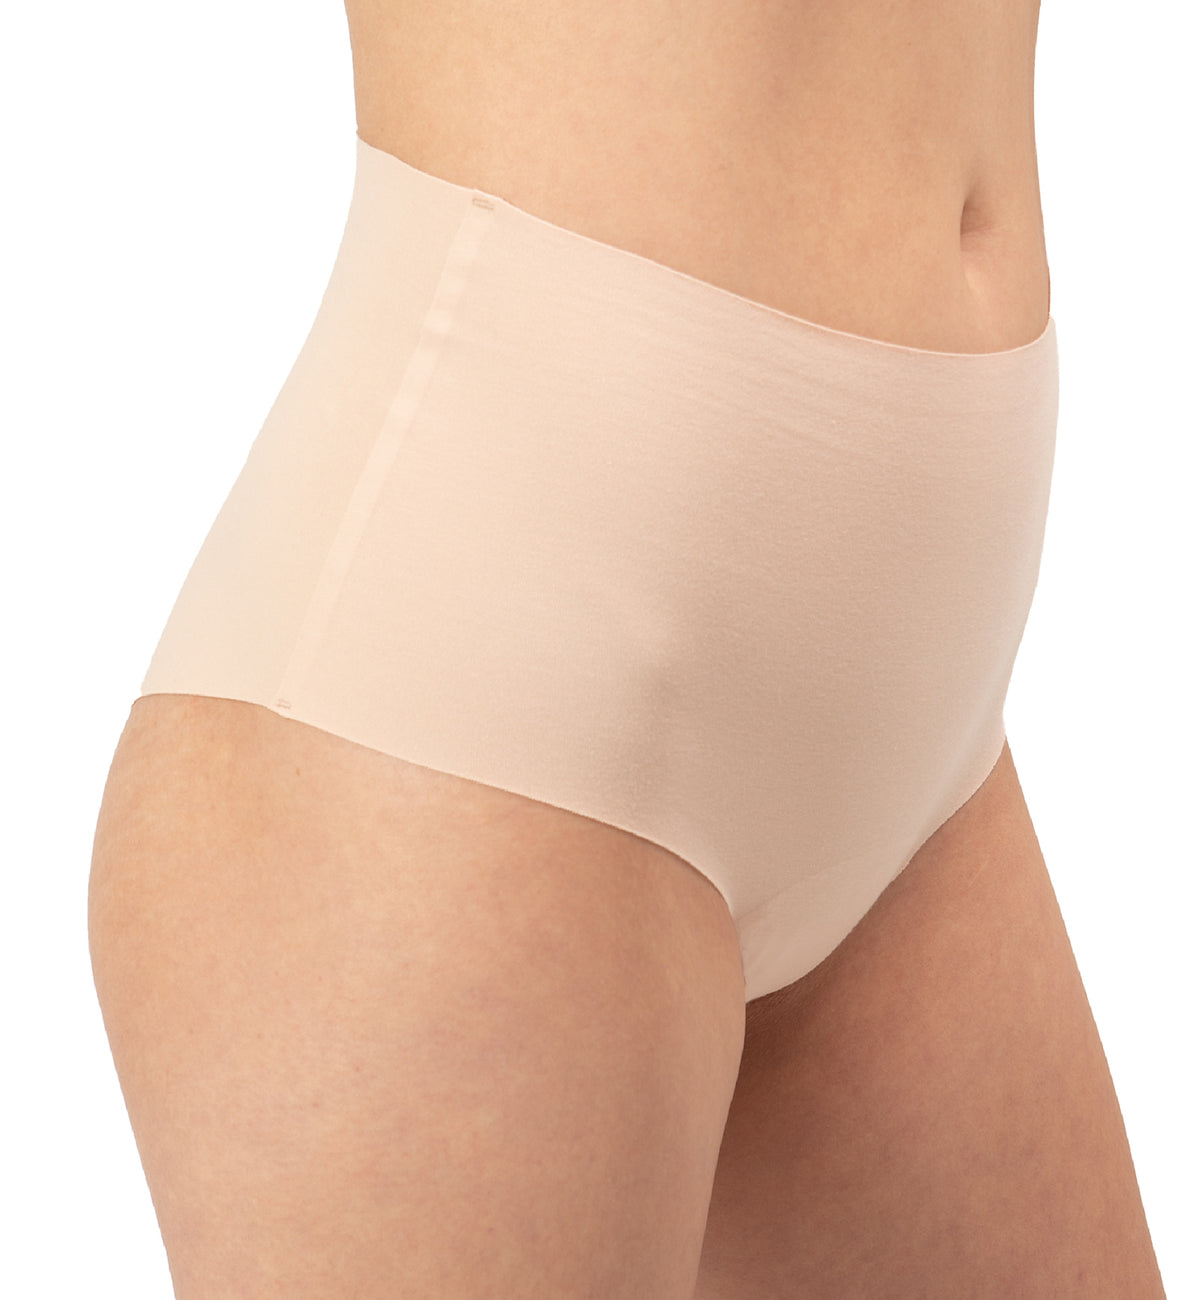 Panty Promise High Waist Hipster,XS,Pale - Pale,XS